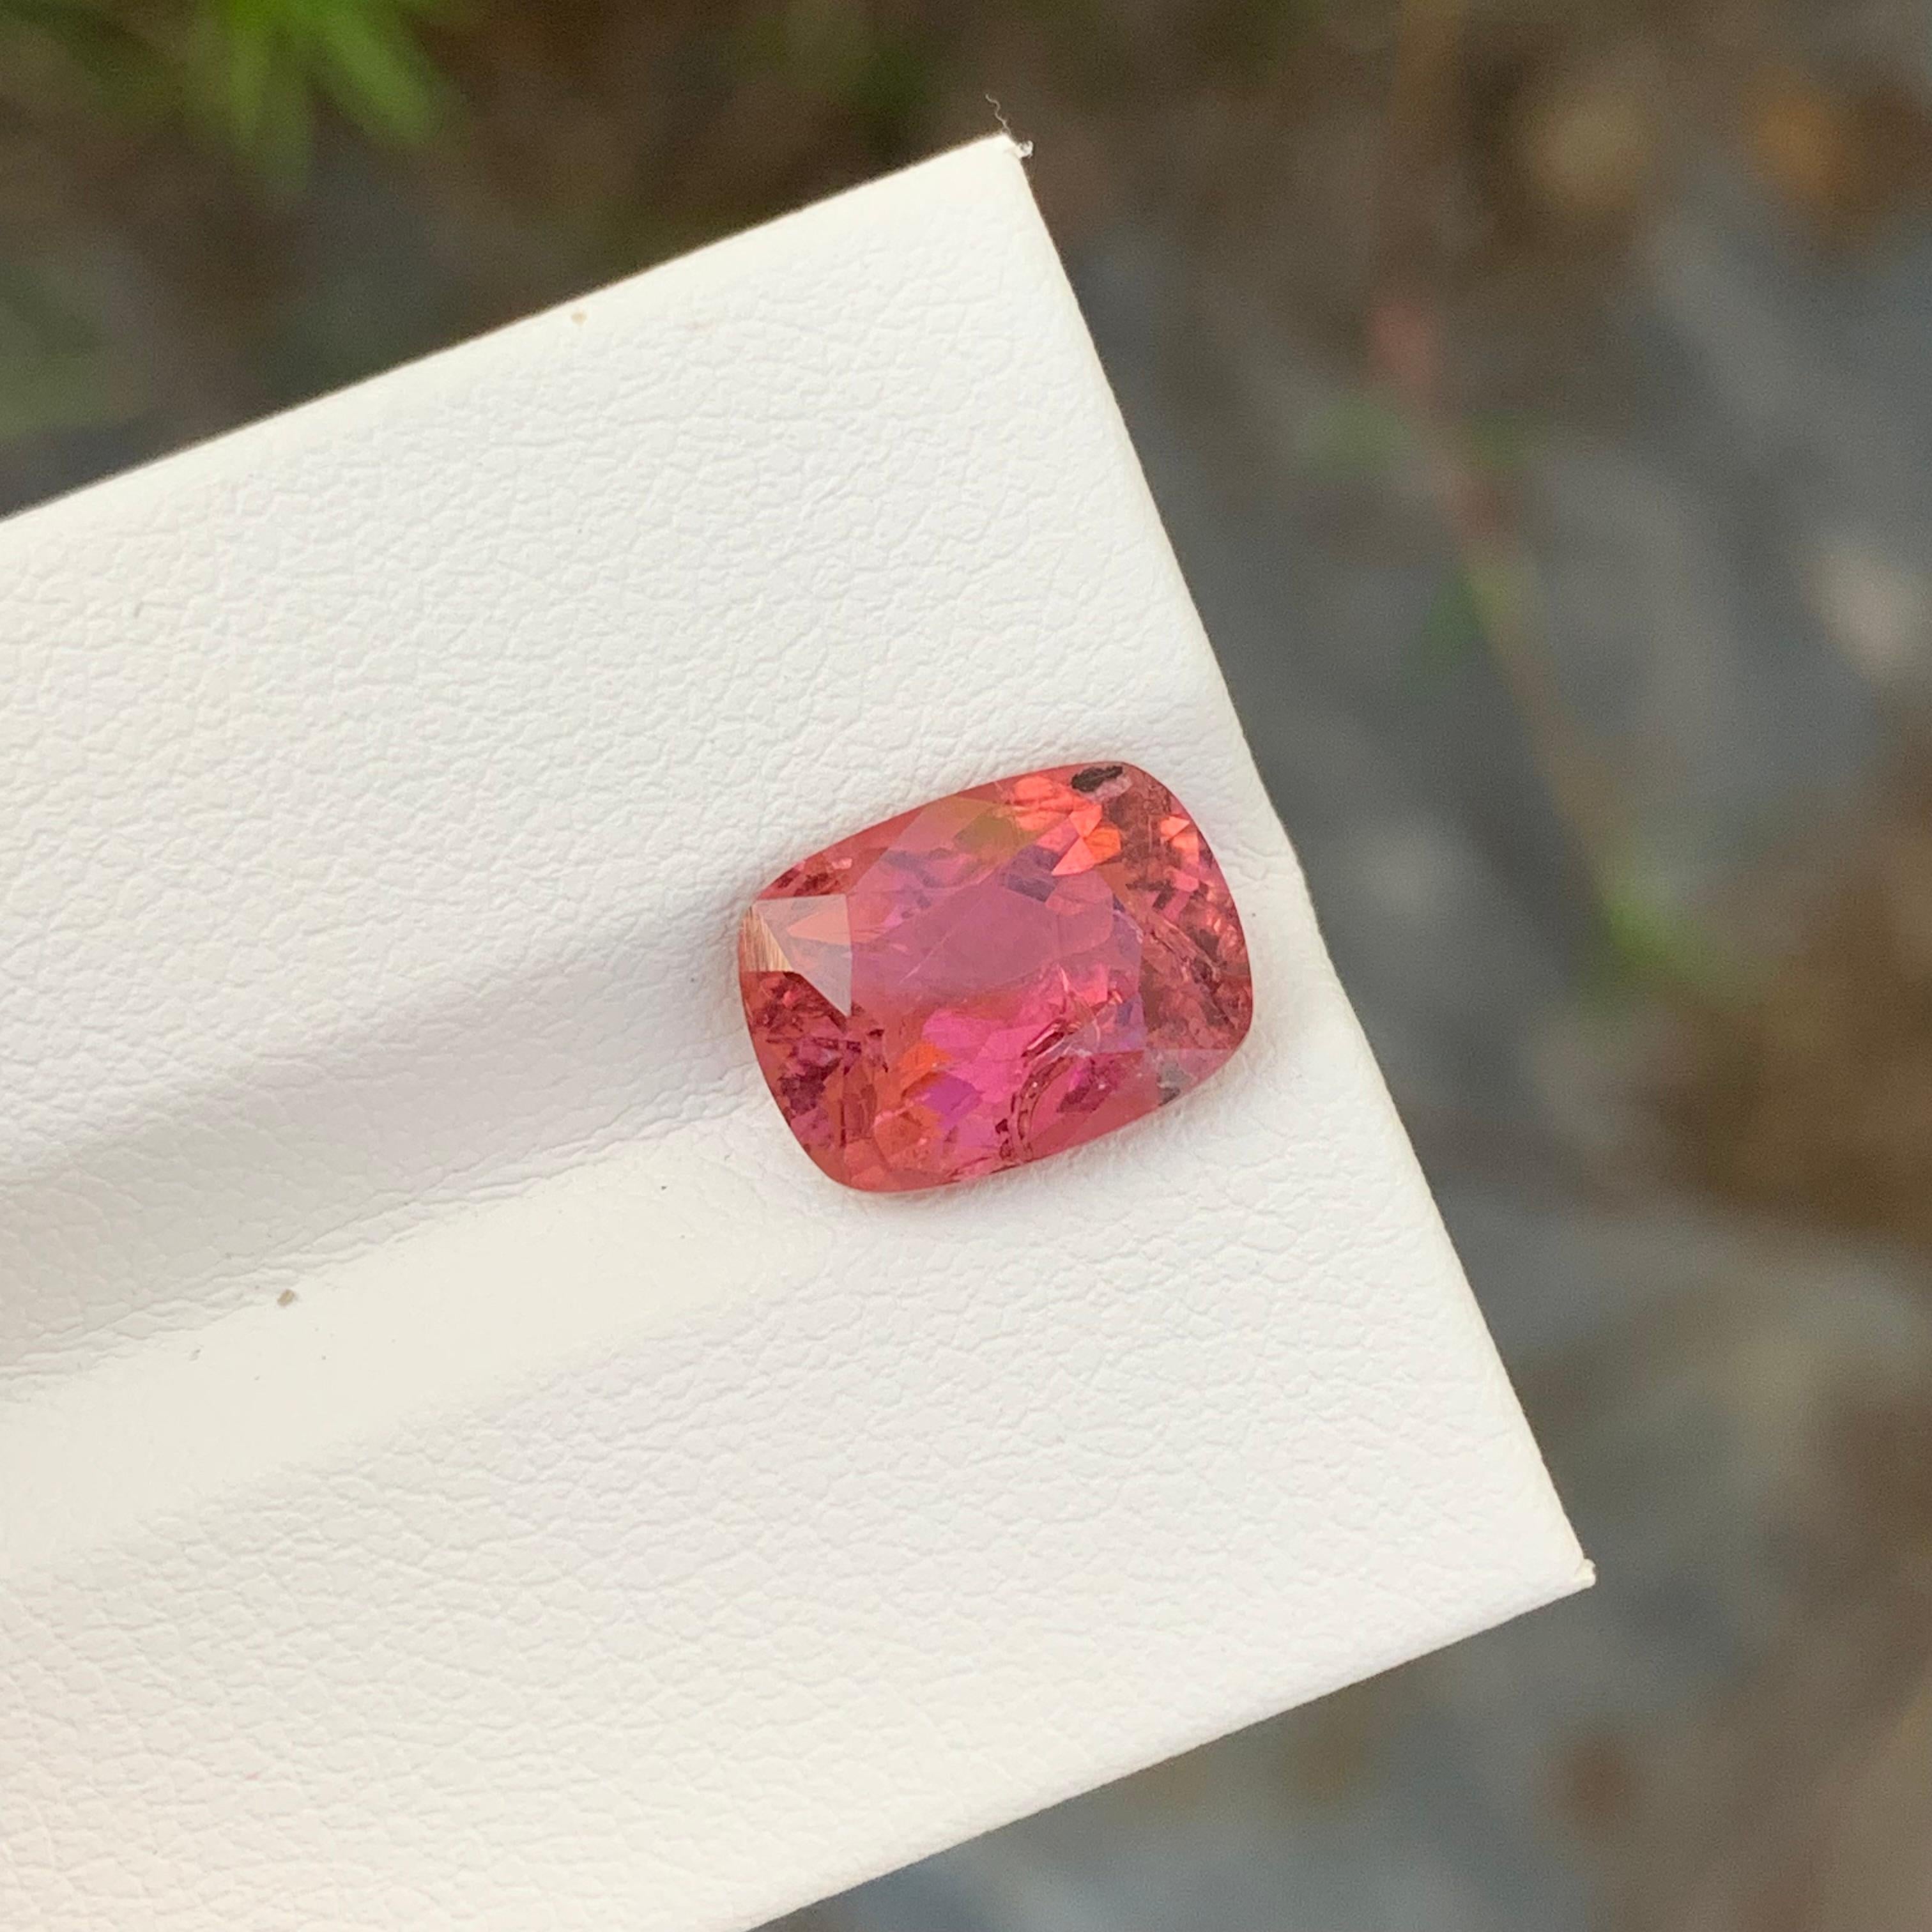 3.20 Carat Faceted Rubellite Tourmaline Cushion Shape Gem From Africa  For Sale 5